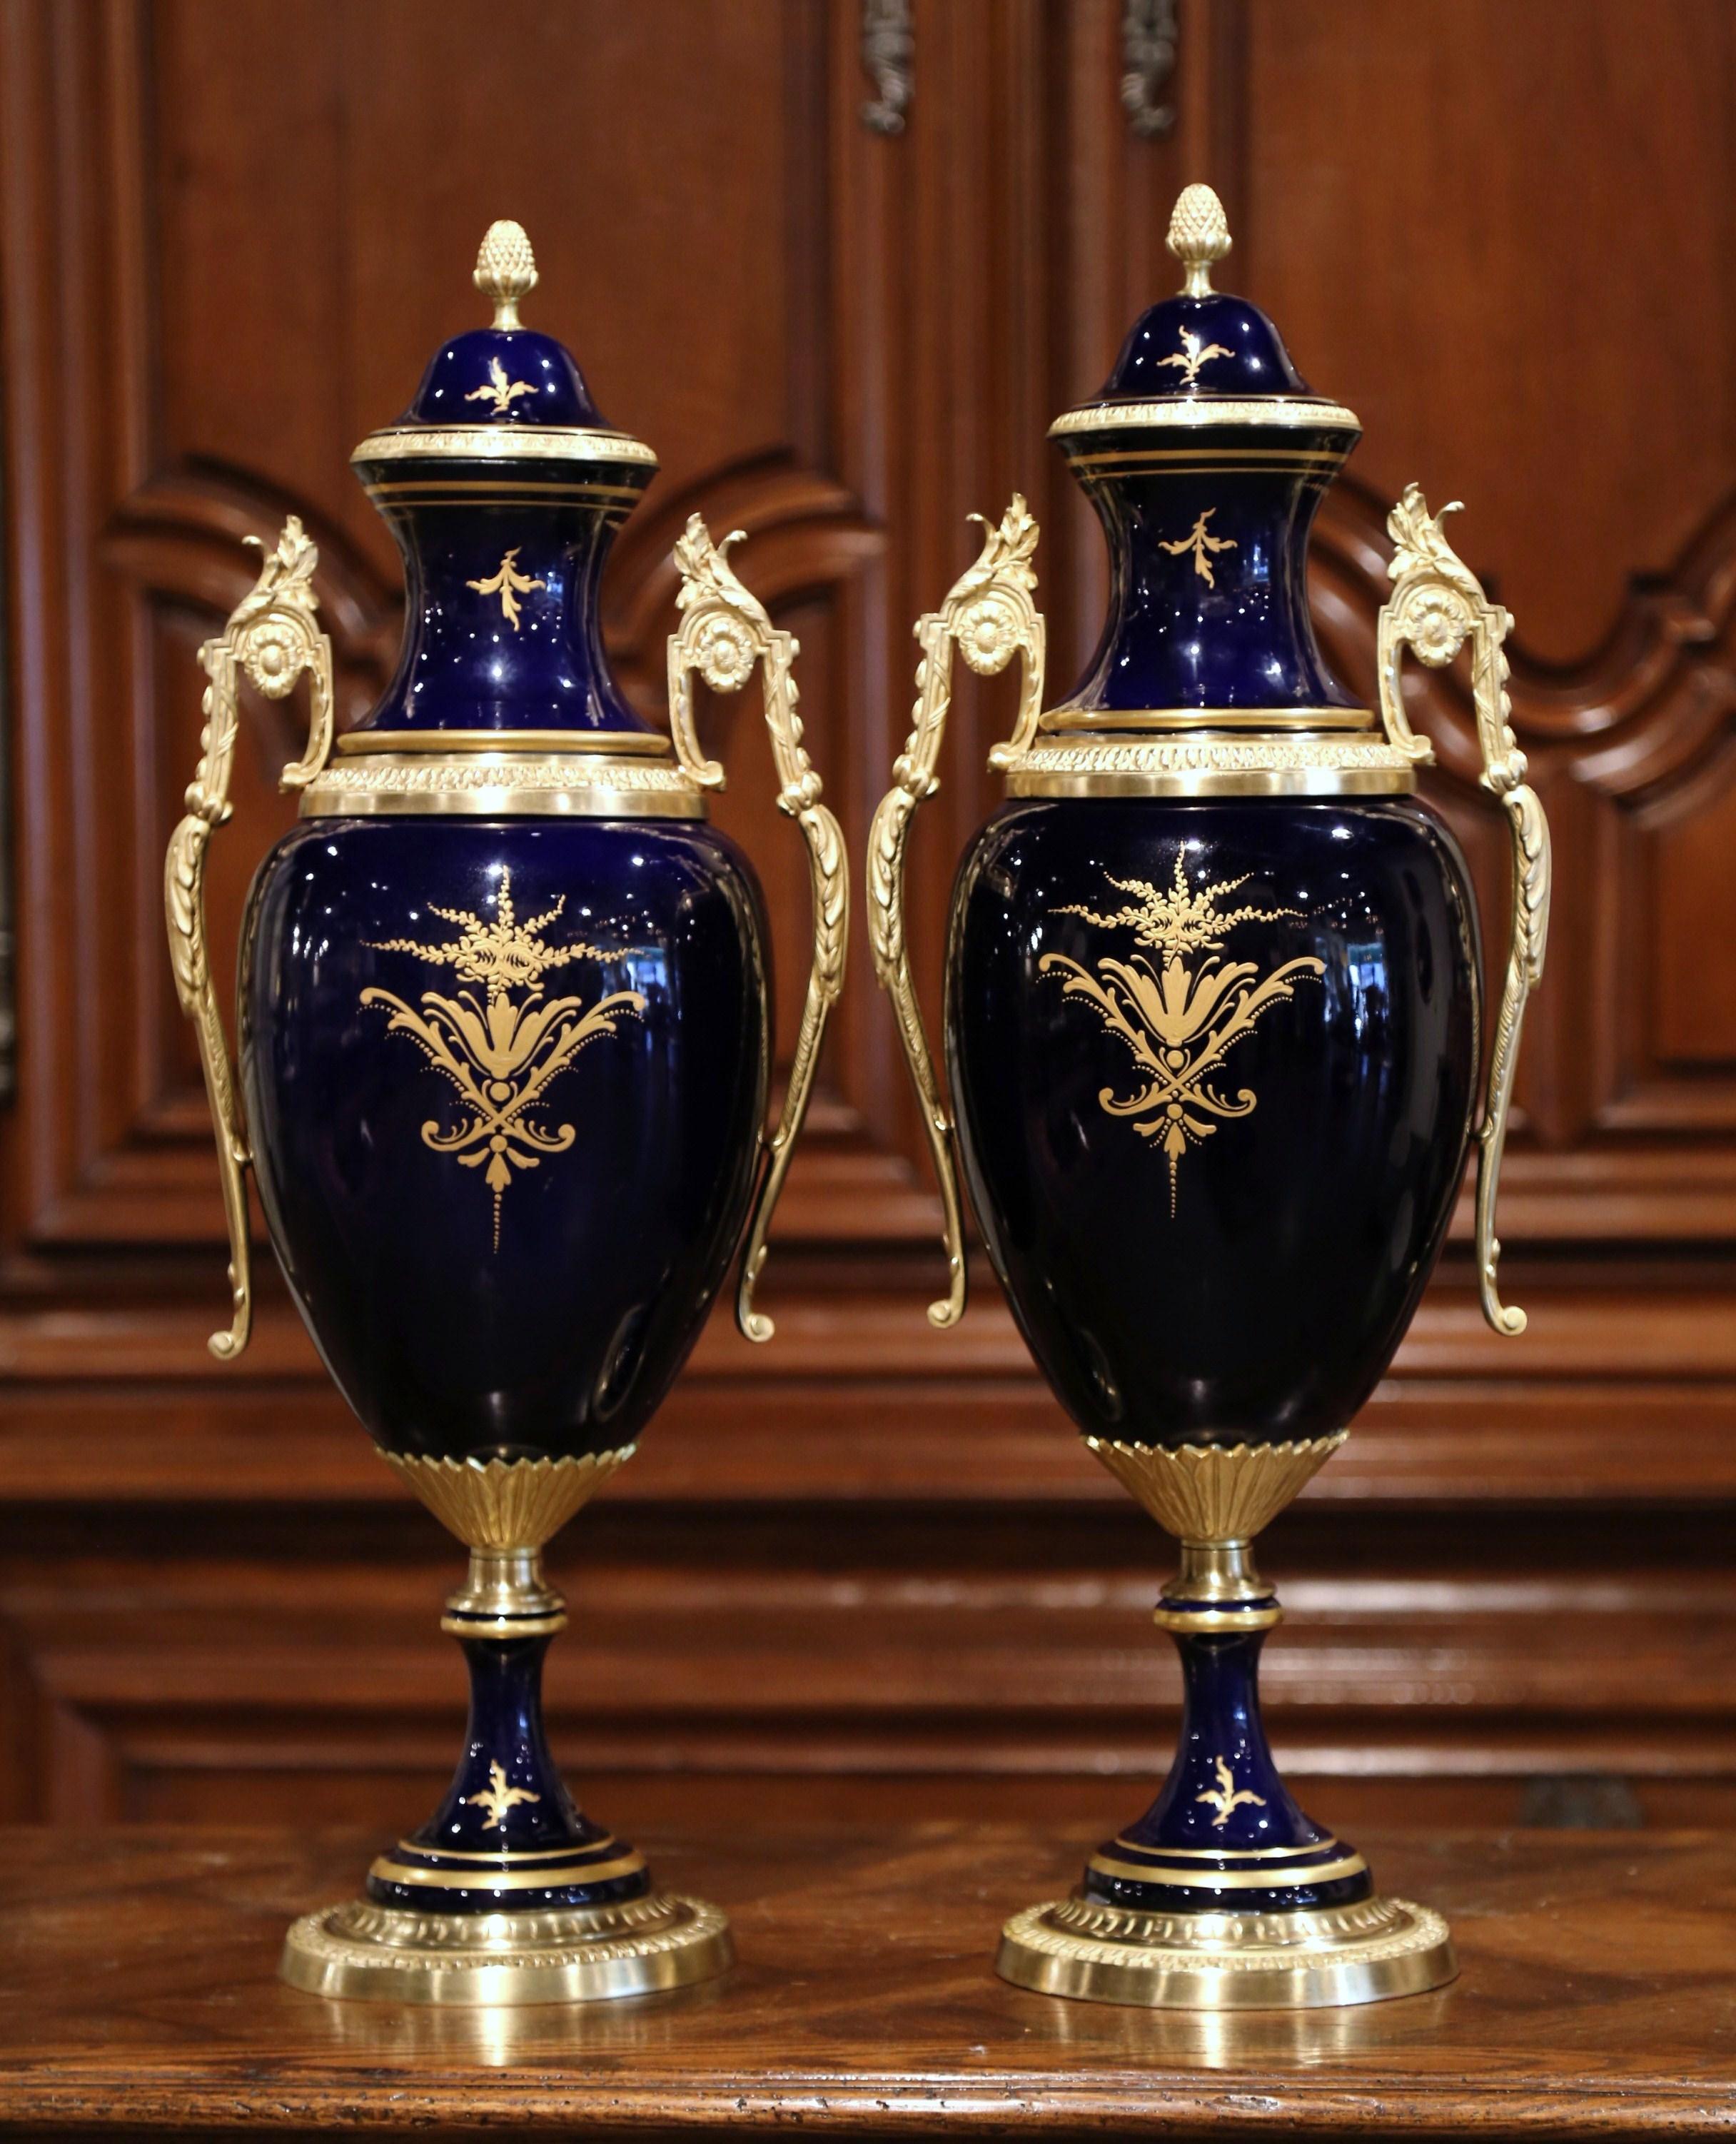 Pair of Mid-20th Century French Blue Royal Porcelain and Bronze Sèvres Urns 4